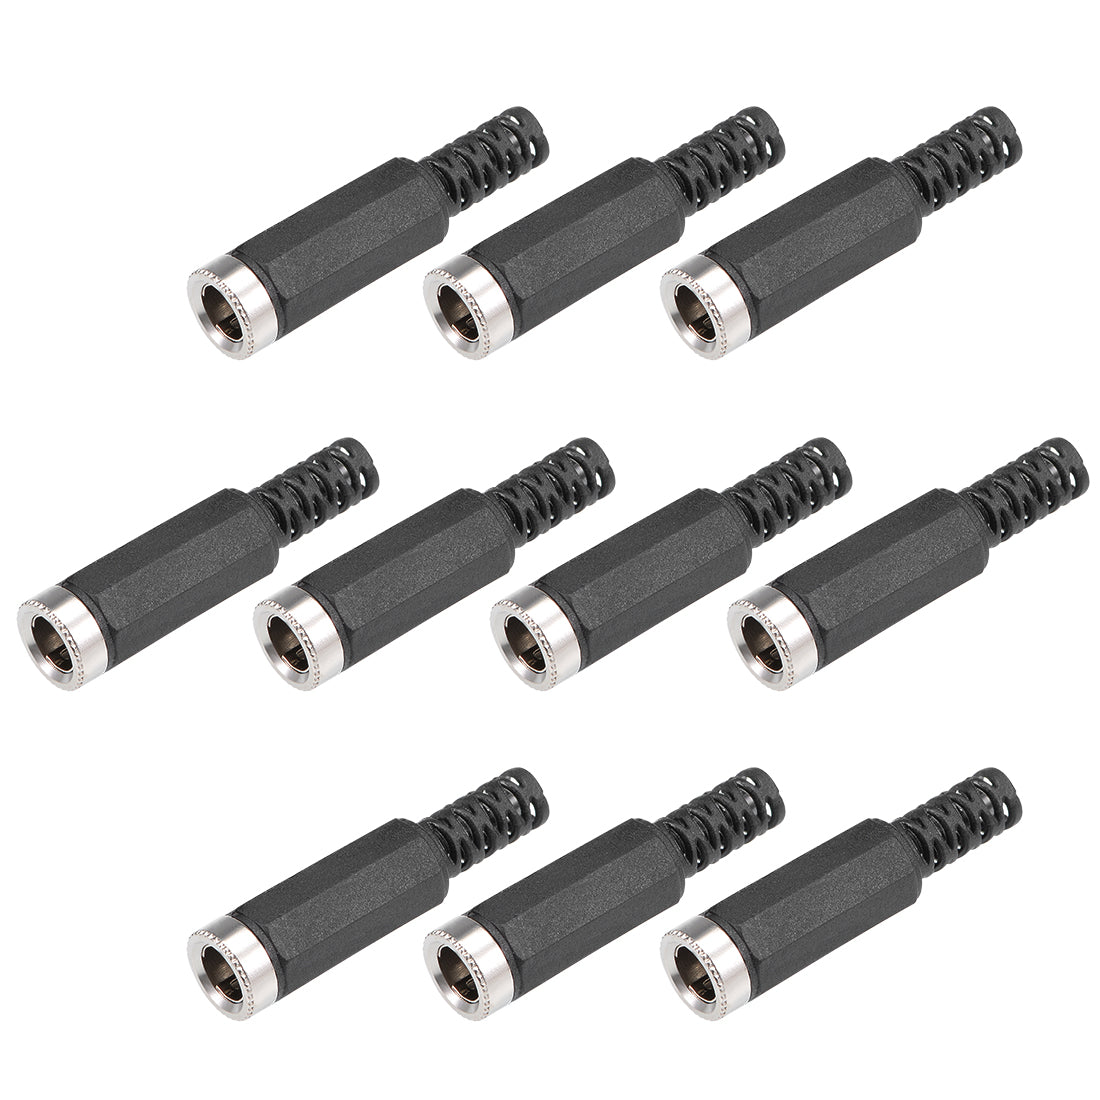 uxcell Uxcell 10 Pcs 5.5mm x 2.5mm Straight Female DC Power Jack Solder Connector Adapter